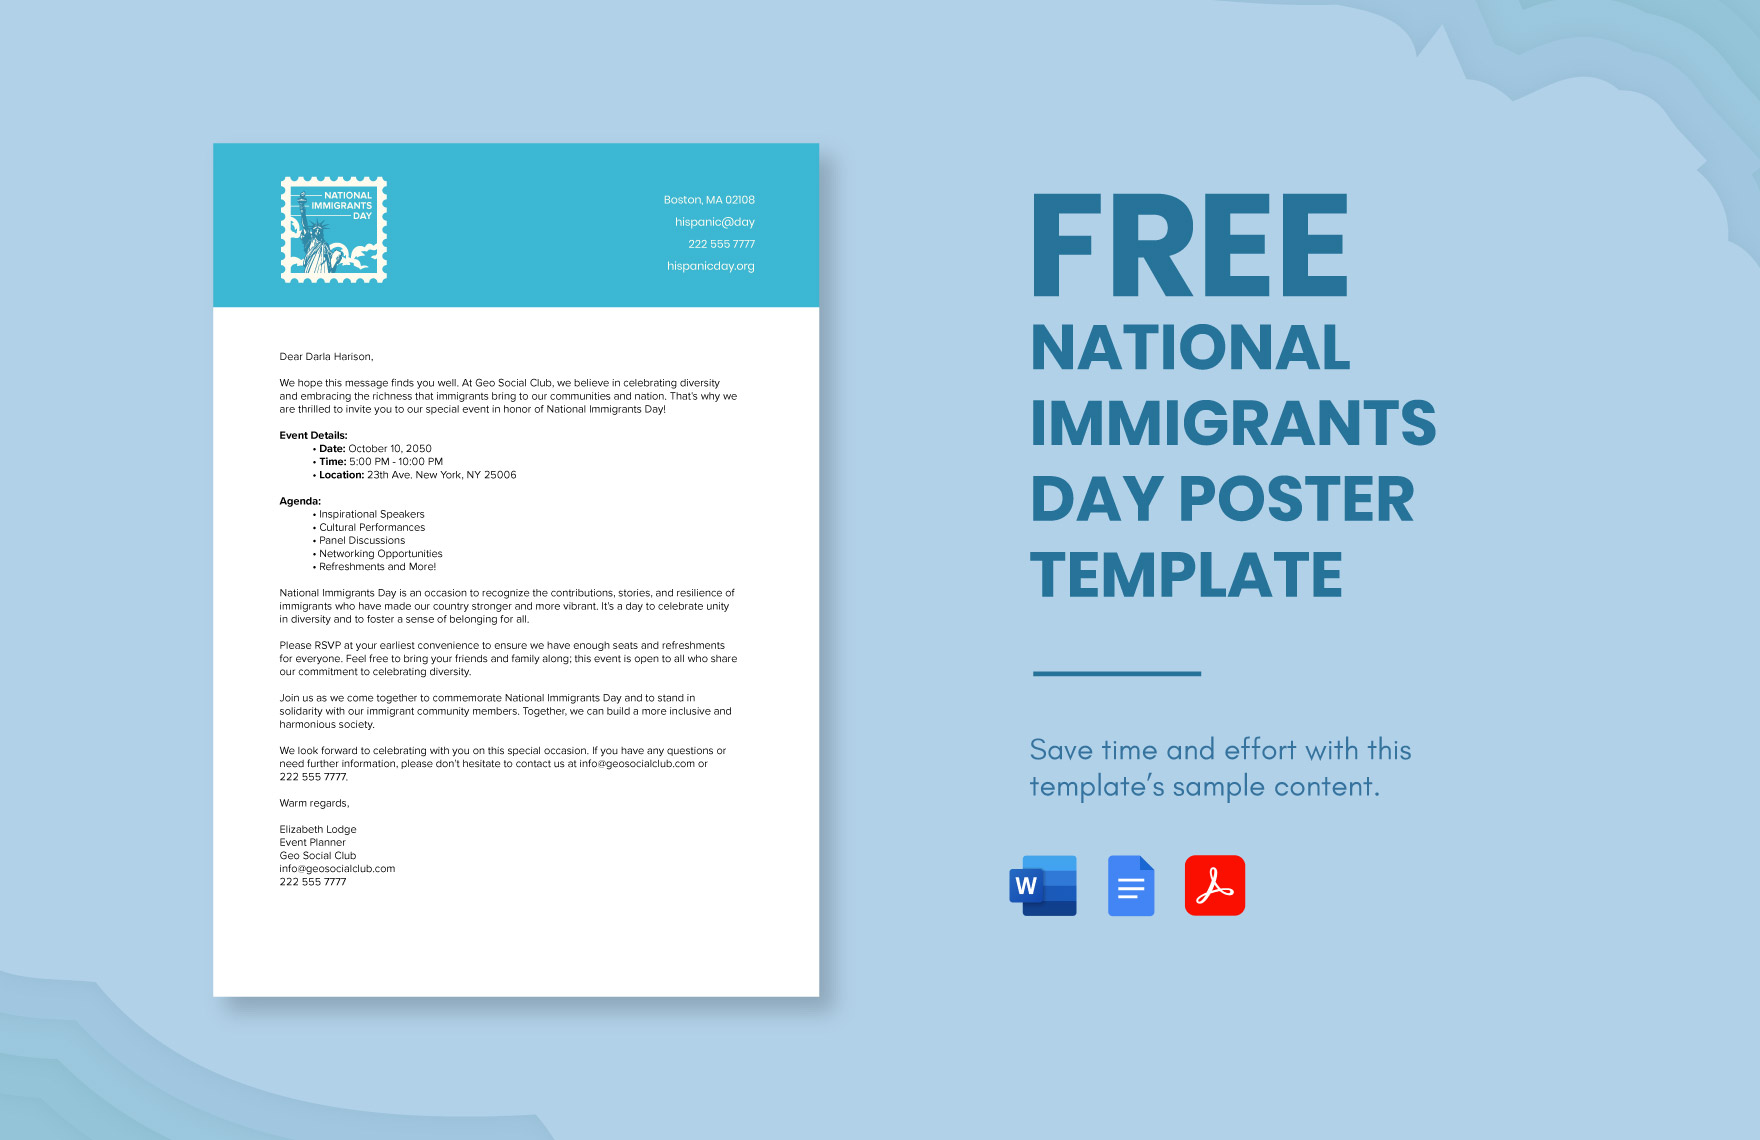 Free National Immigrants Day Email Template in Word, Google Docs, PDF